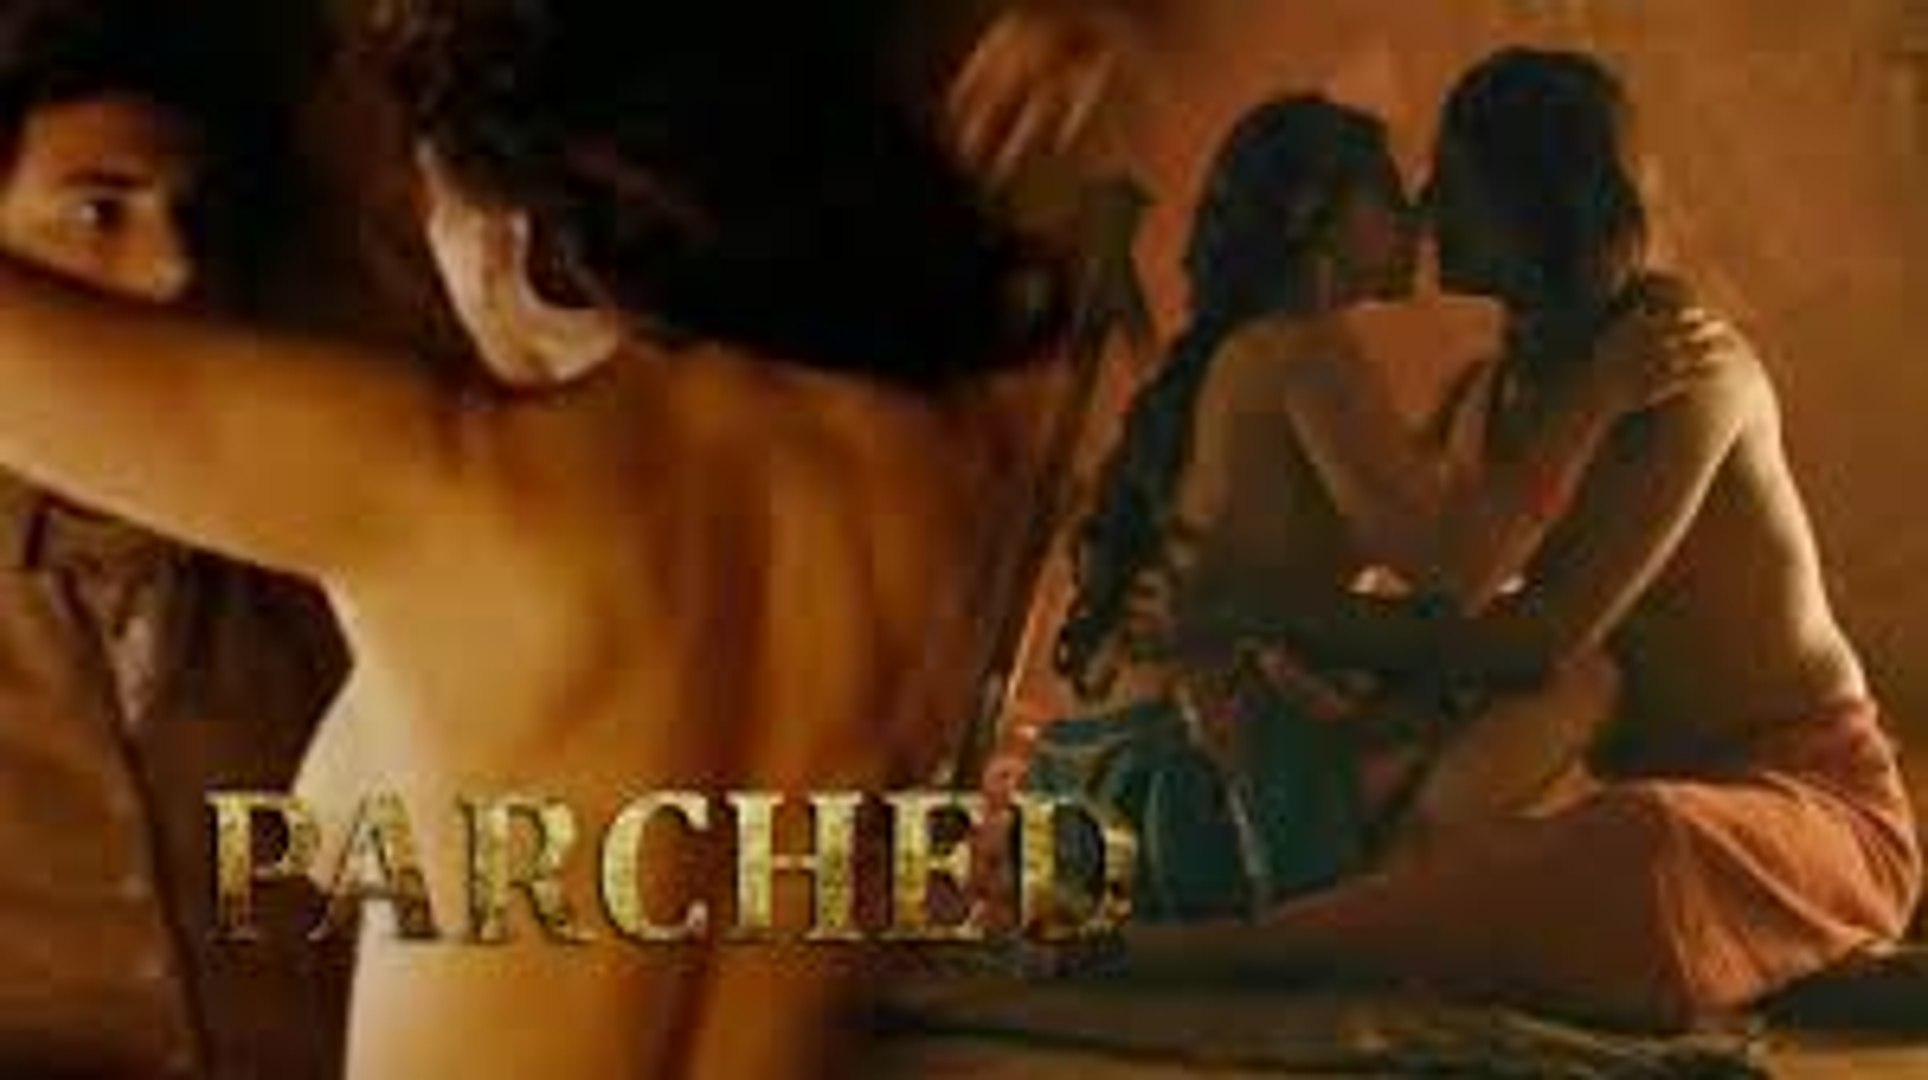 English Erotic Videos Show On Dailymotion Com - Parched - UNRATED - Dvd Part-1 - video dailymotion